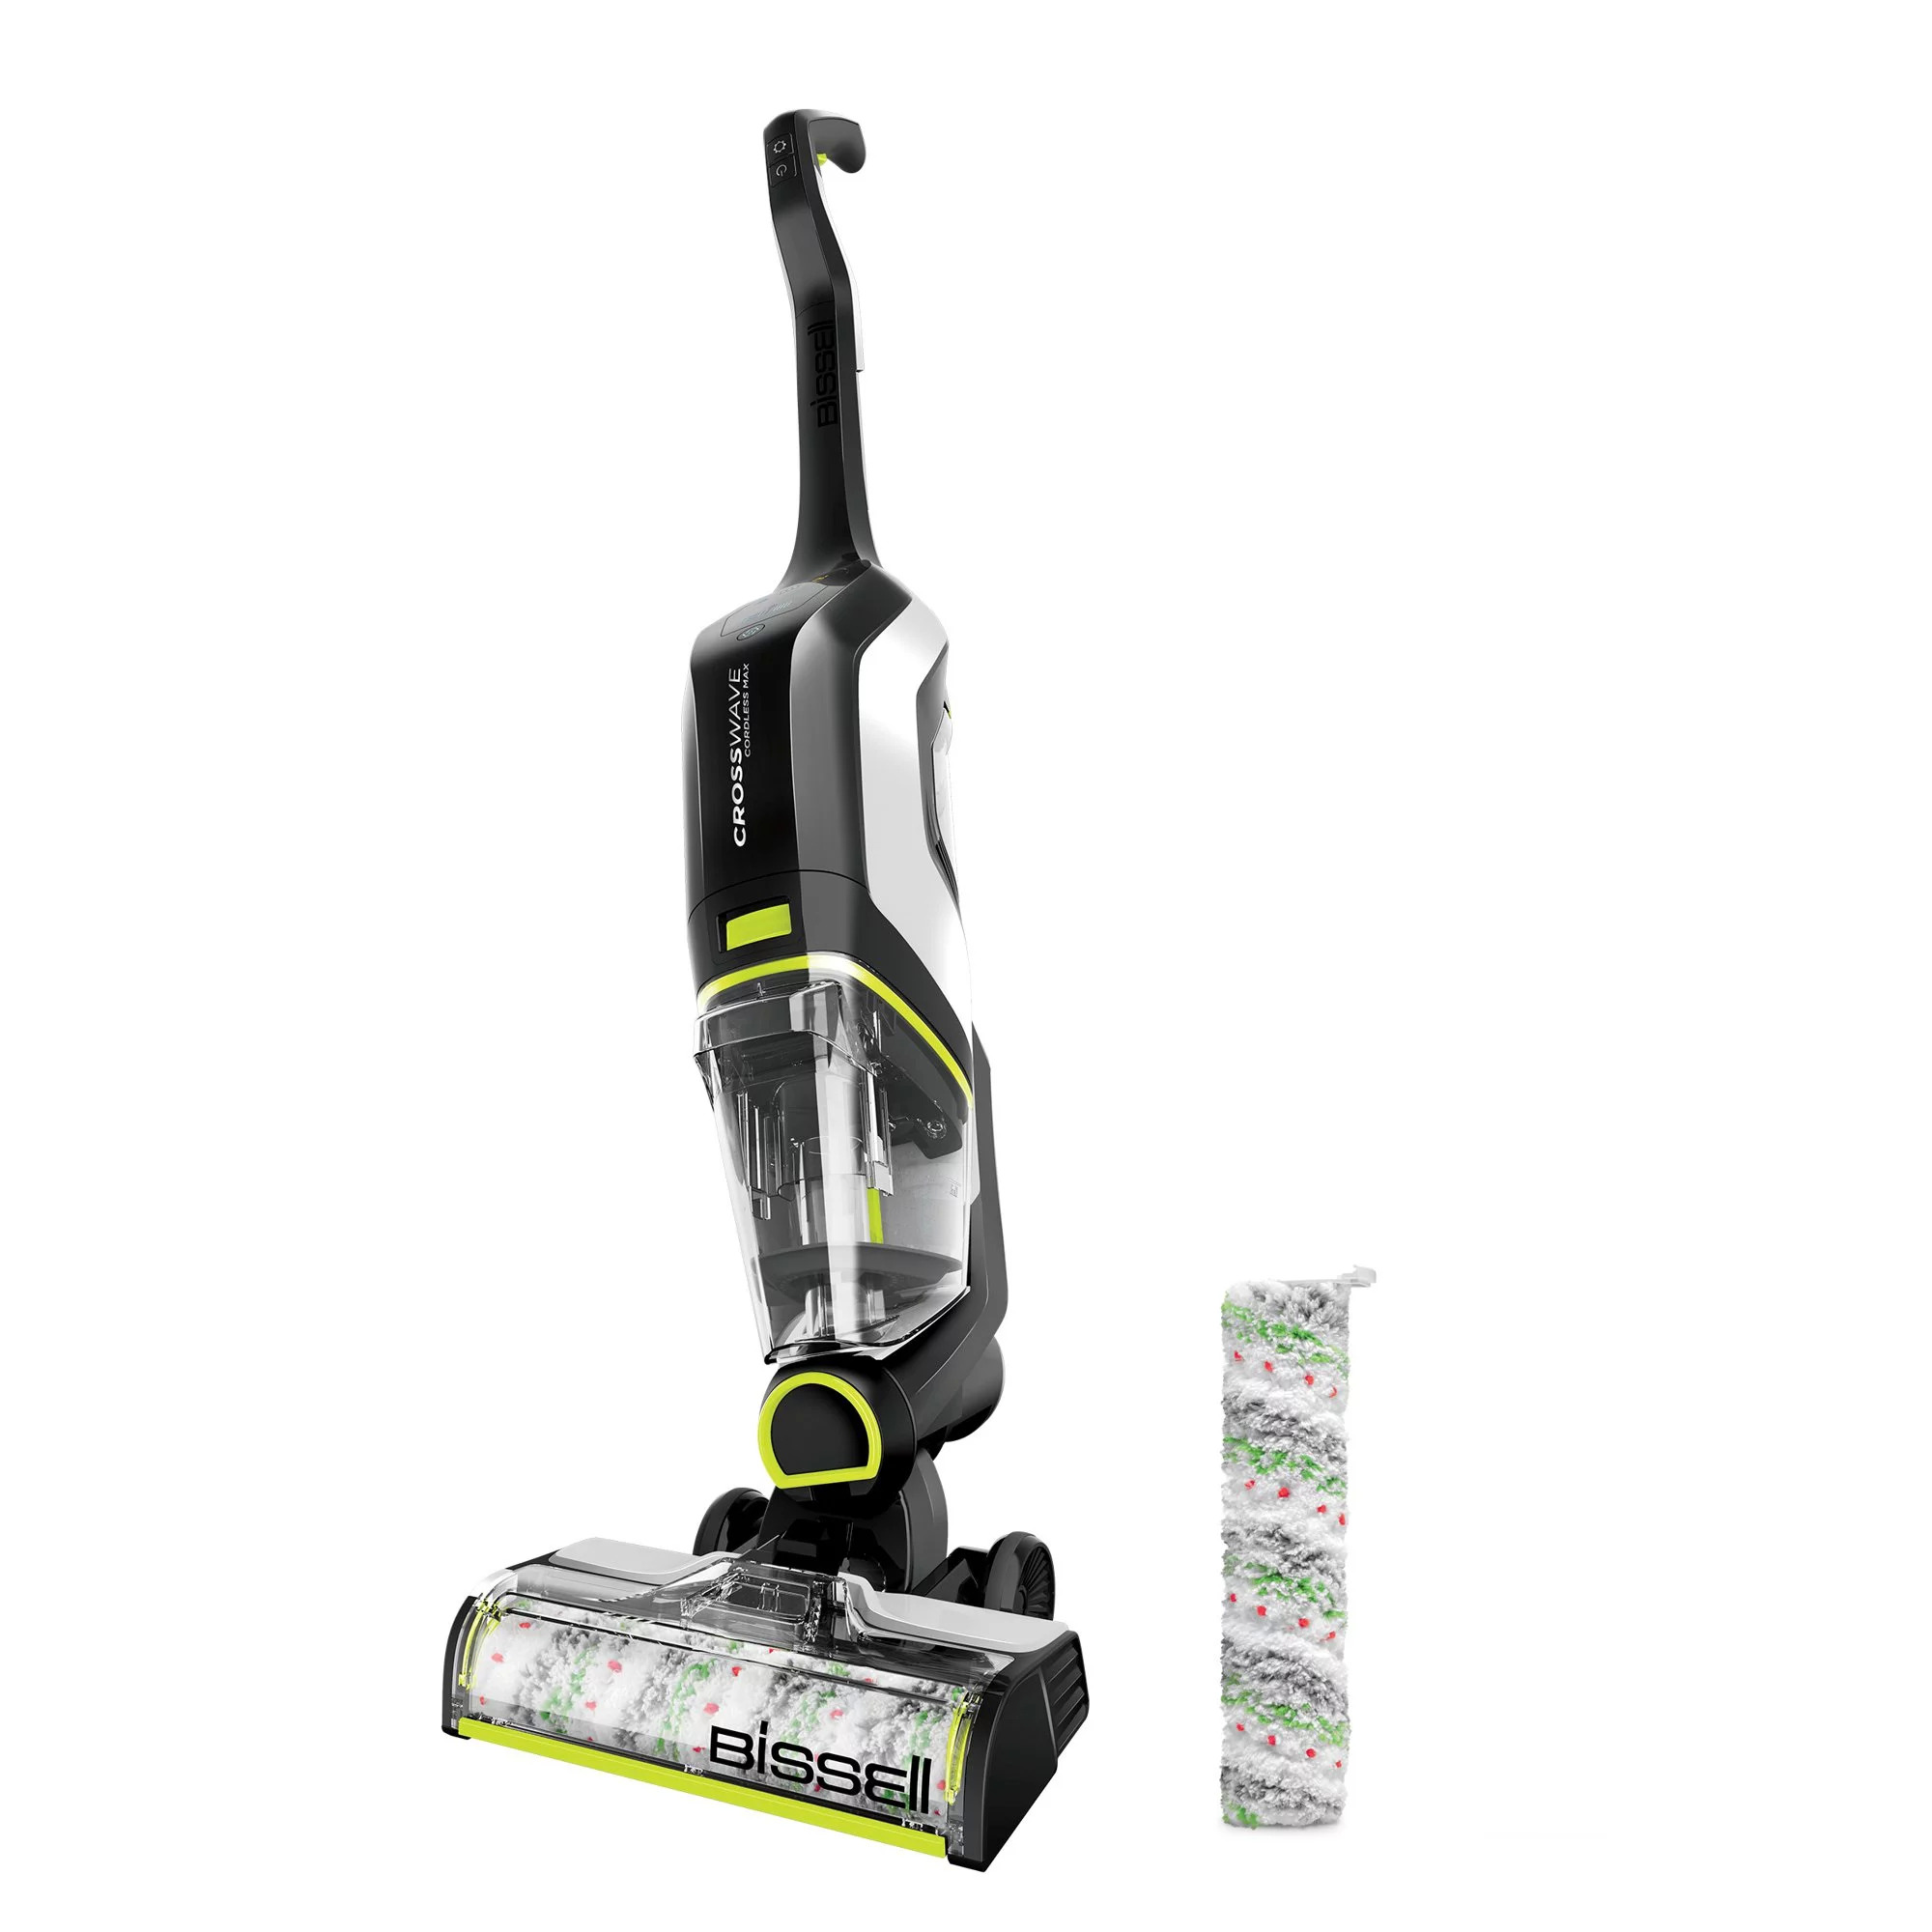 Bissell CrossWave Cordless MAX Floor & Carpet Cleaner Wet/Dry Vacuum $199.99 + Free Shipping